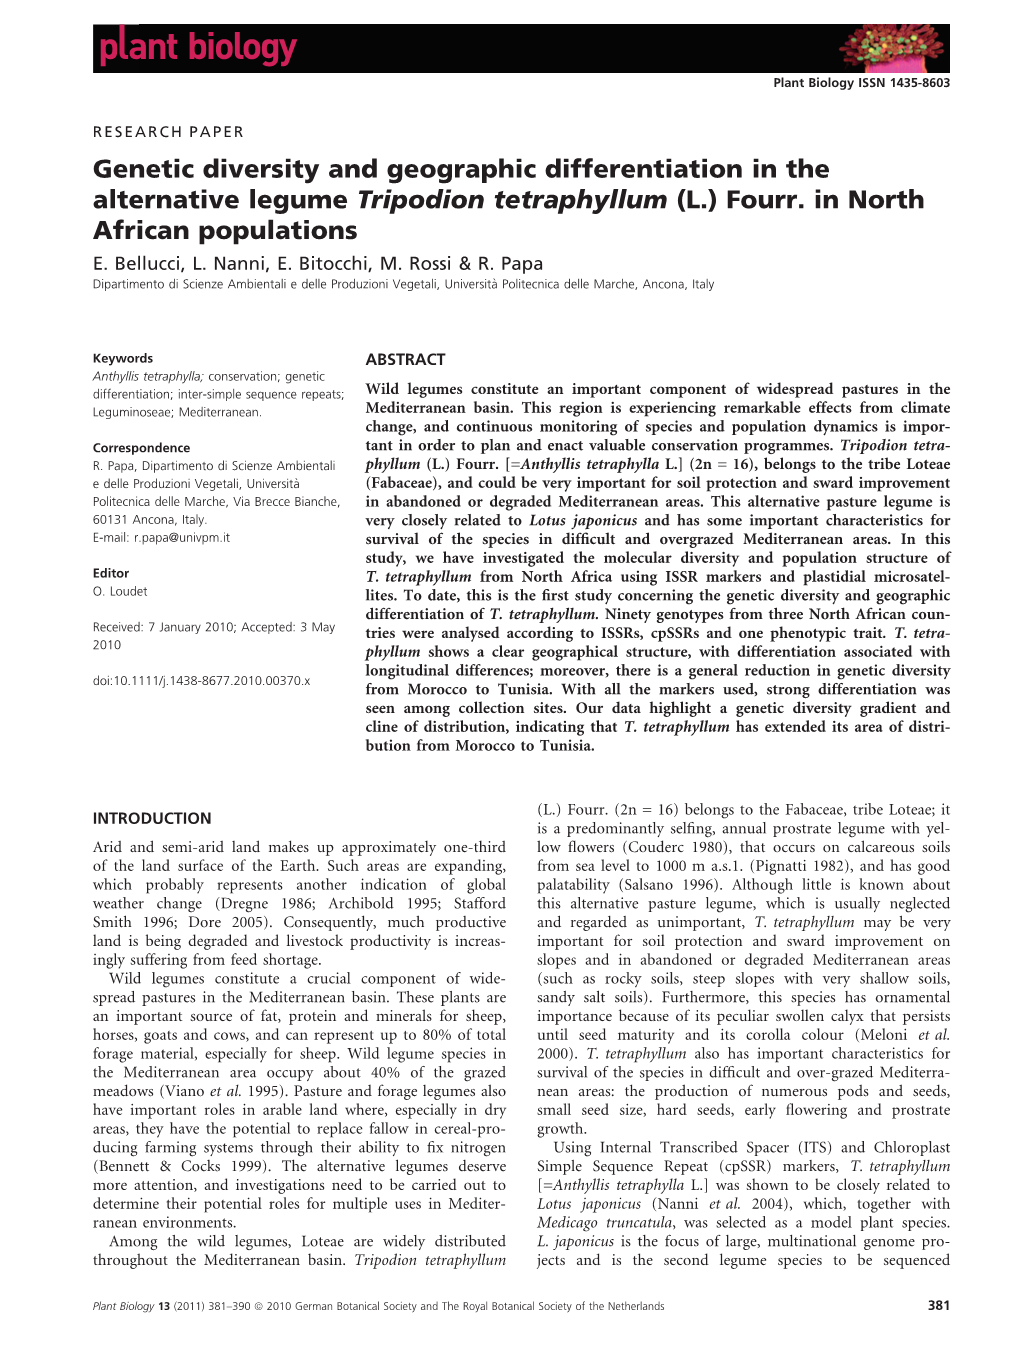 Genetic Diversity and Geographic Differentiation in the Alternative Legume Tripodion Tetraphyllum (L.) Fourr